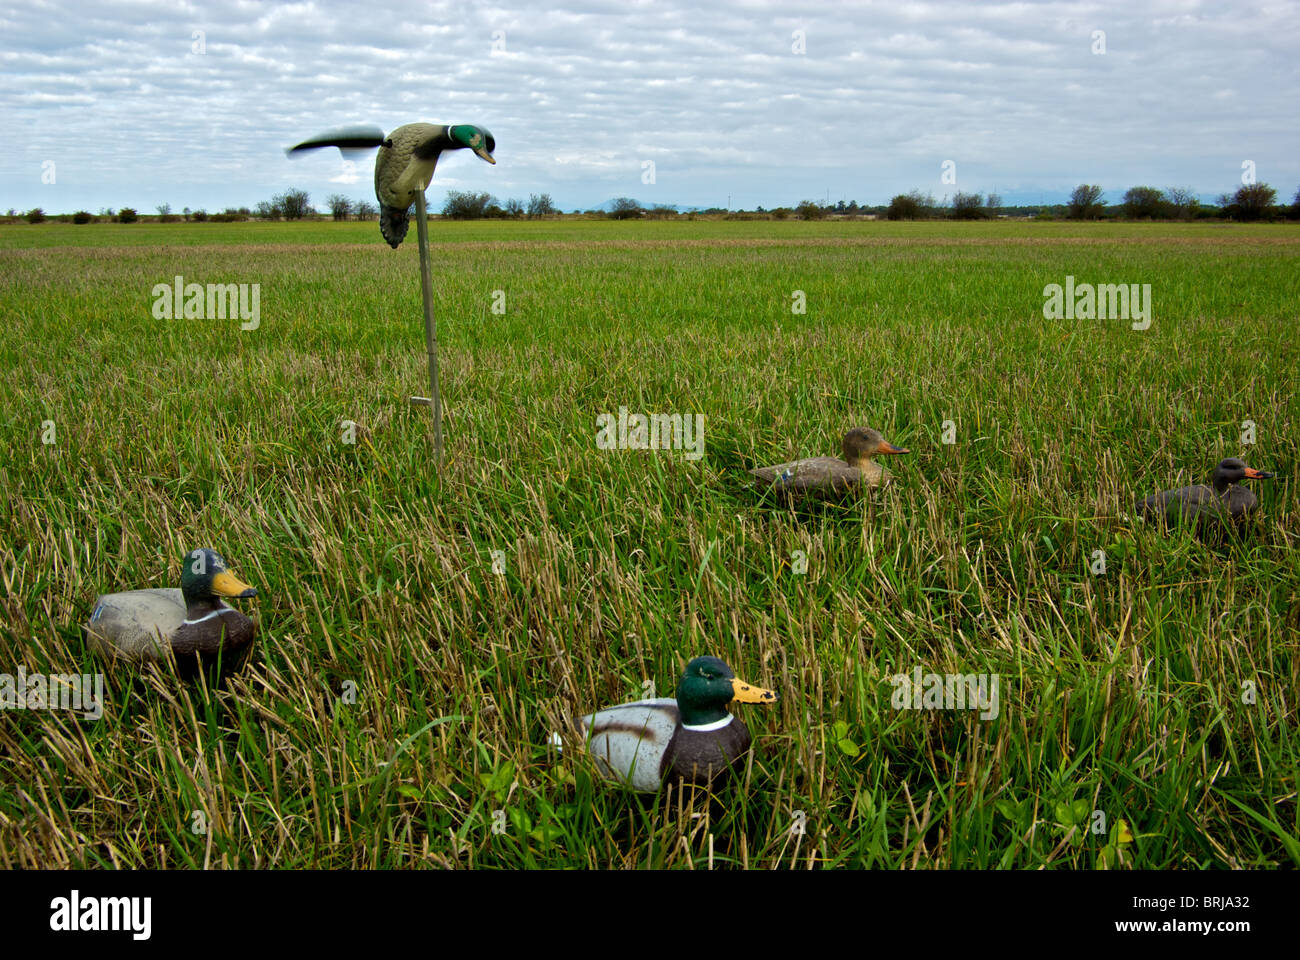 Rotating motorized wings in high speed motion blur on hen and drake mallard Mojo Duck decoys in harvested barley stubble field Stock Photo